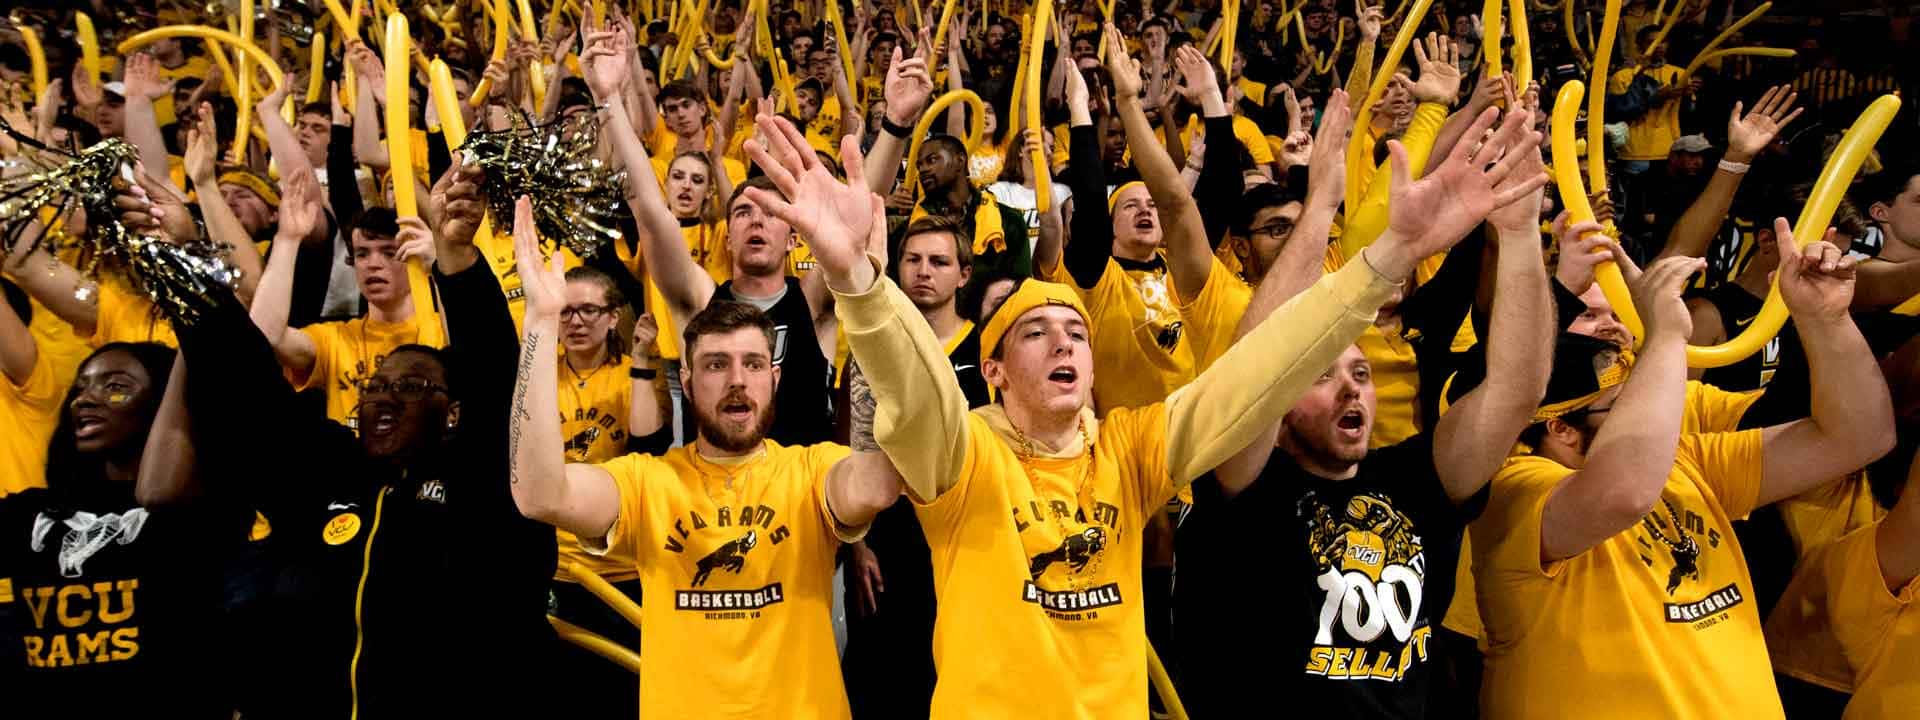 The student section during a VCU basketball game.